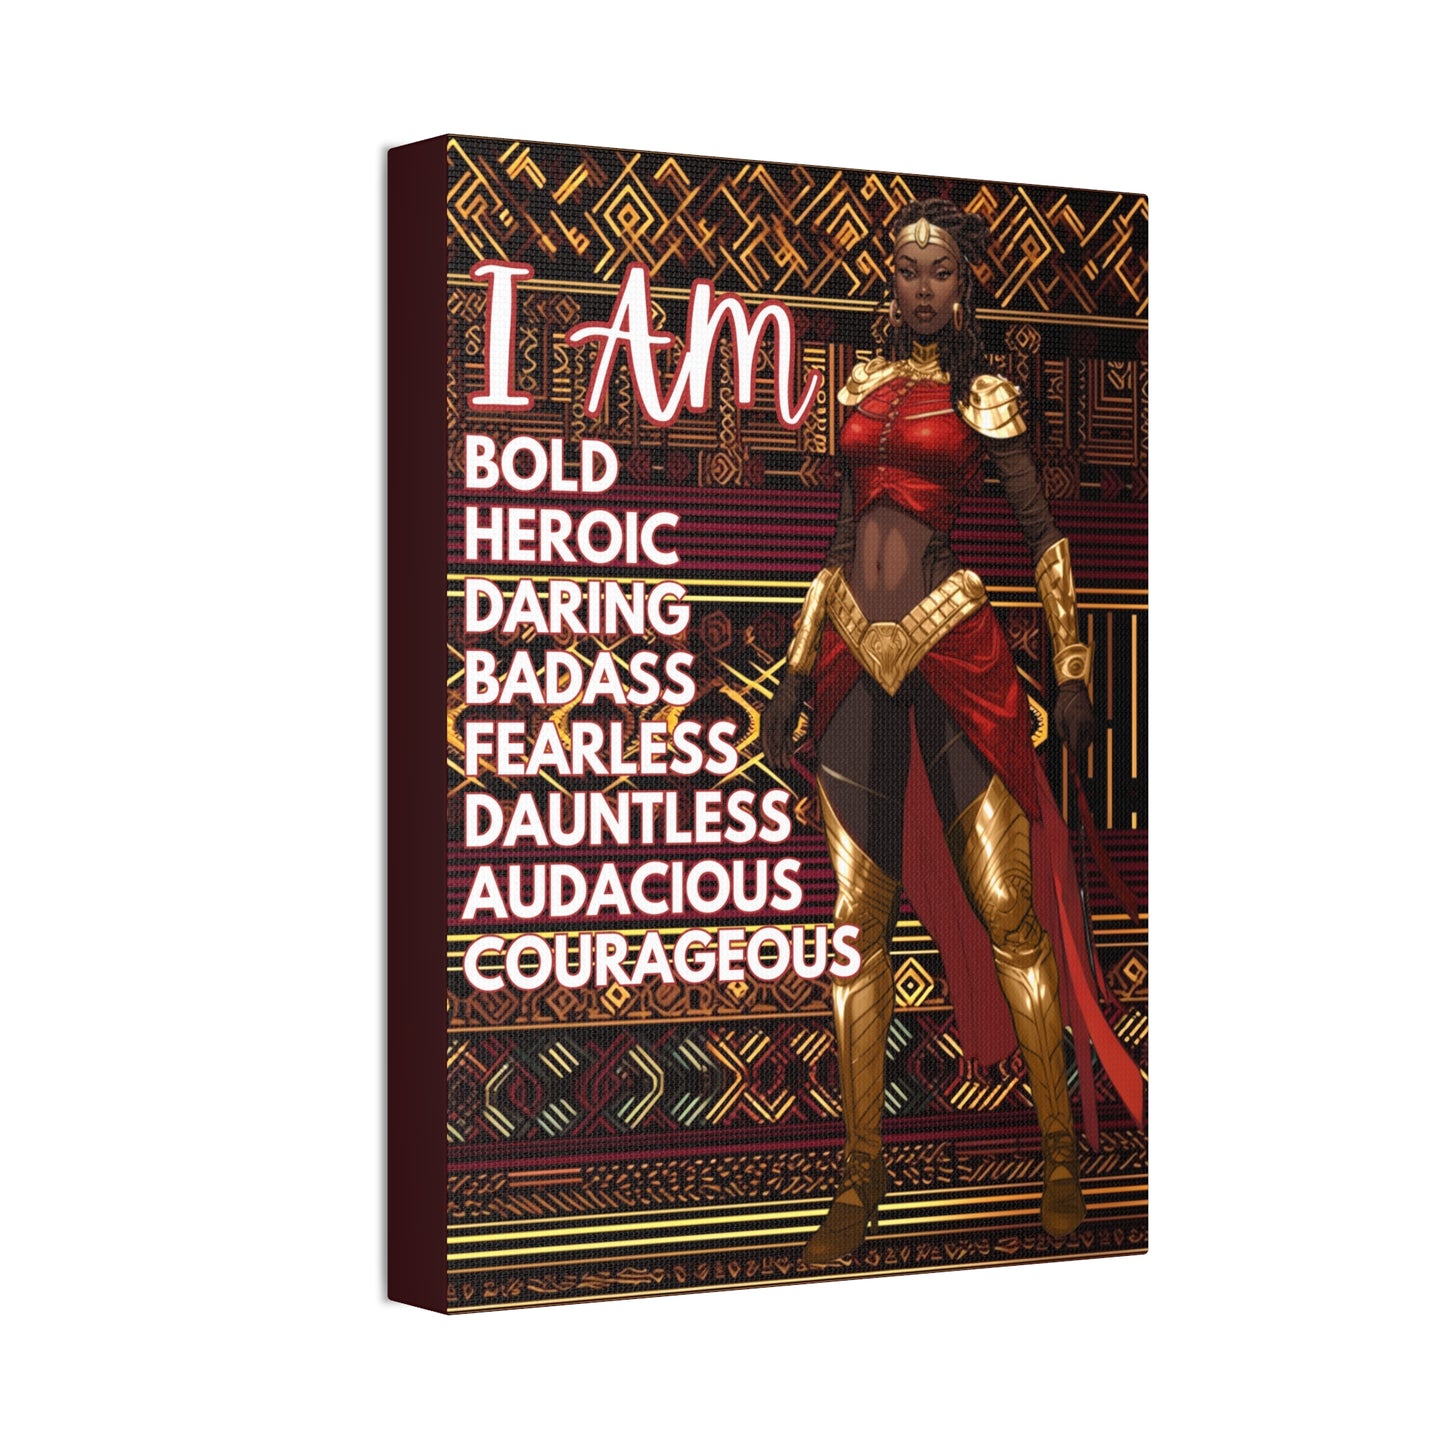 “Bold” BADASS WARRIOR WOMAN | Canvas Stretched, 1.5 | Affirmations Accessories